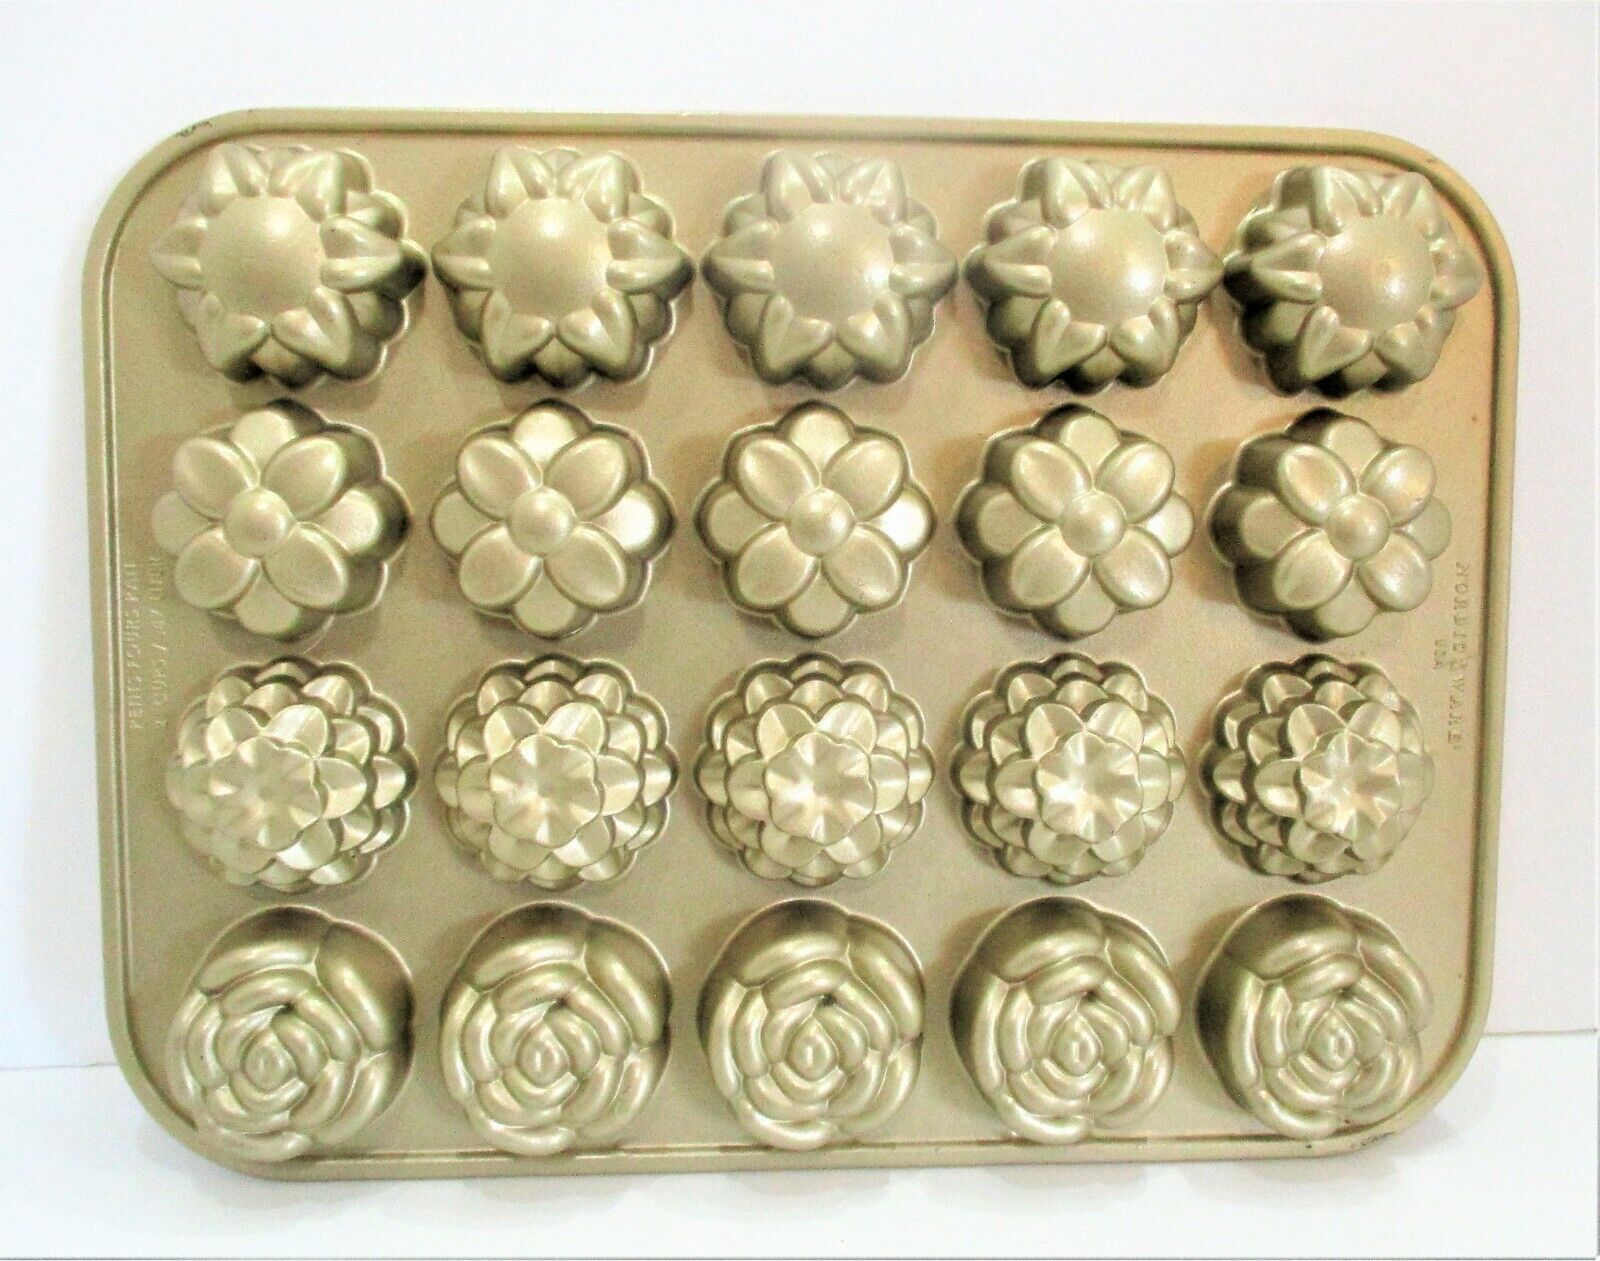 Nordic Ware 2 Cup Petits Fours Baking Pan .47 Liters Flowers